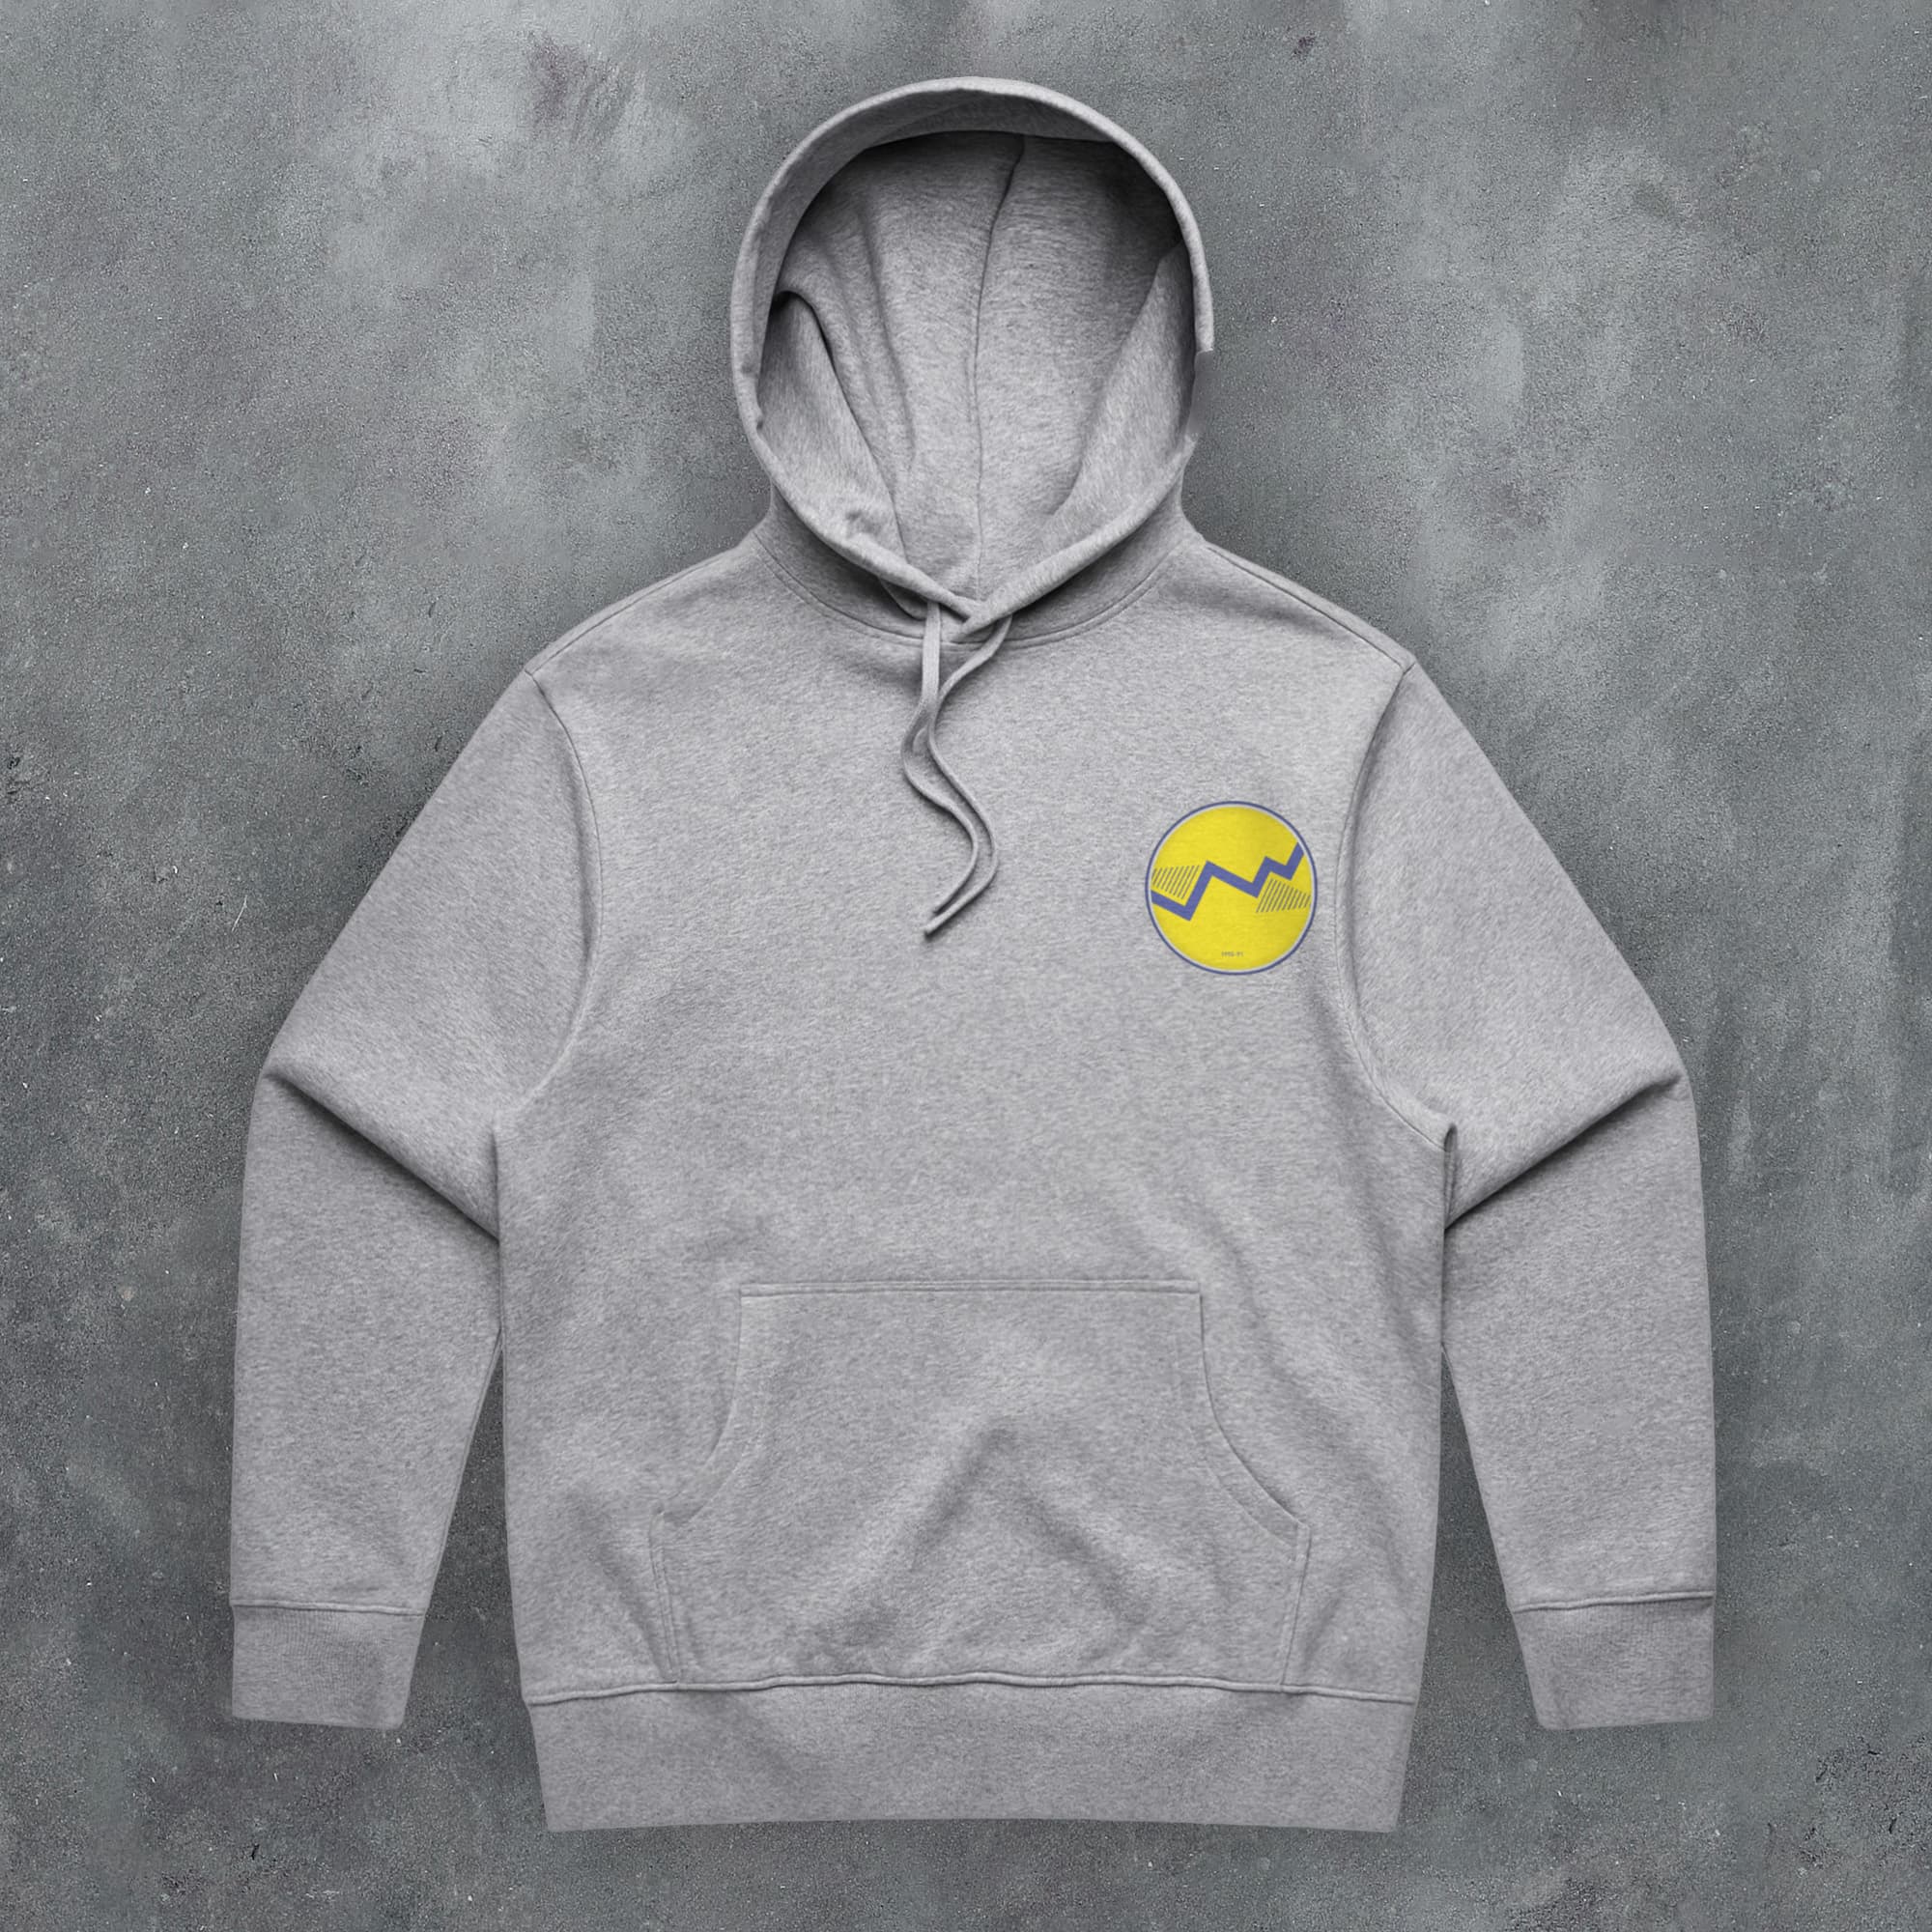 a grey sweatshirt with a yellow smiley face on it